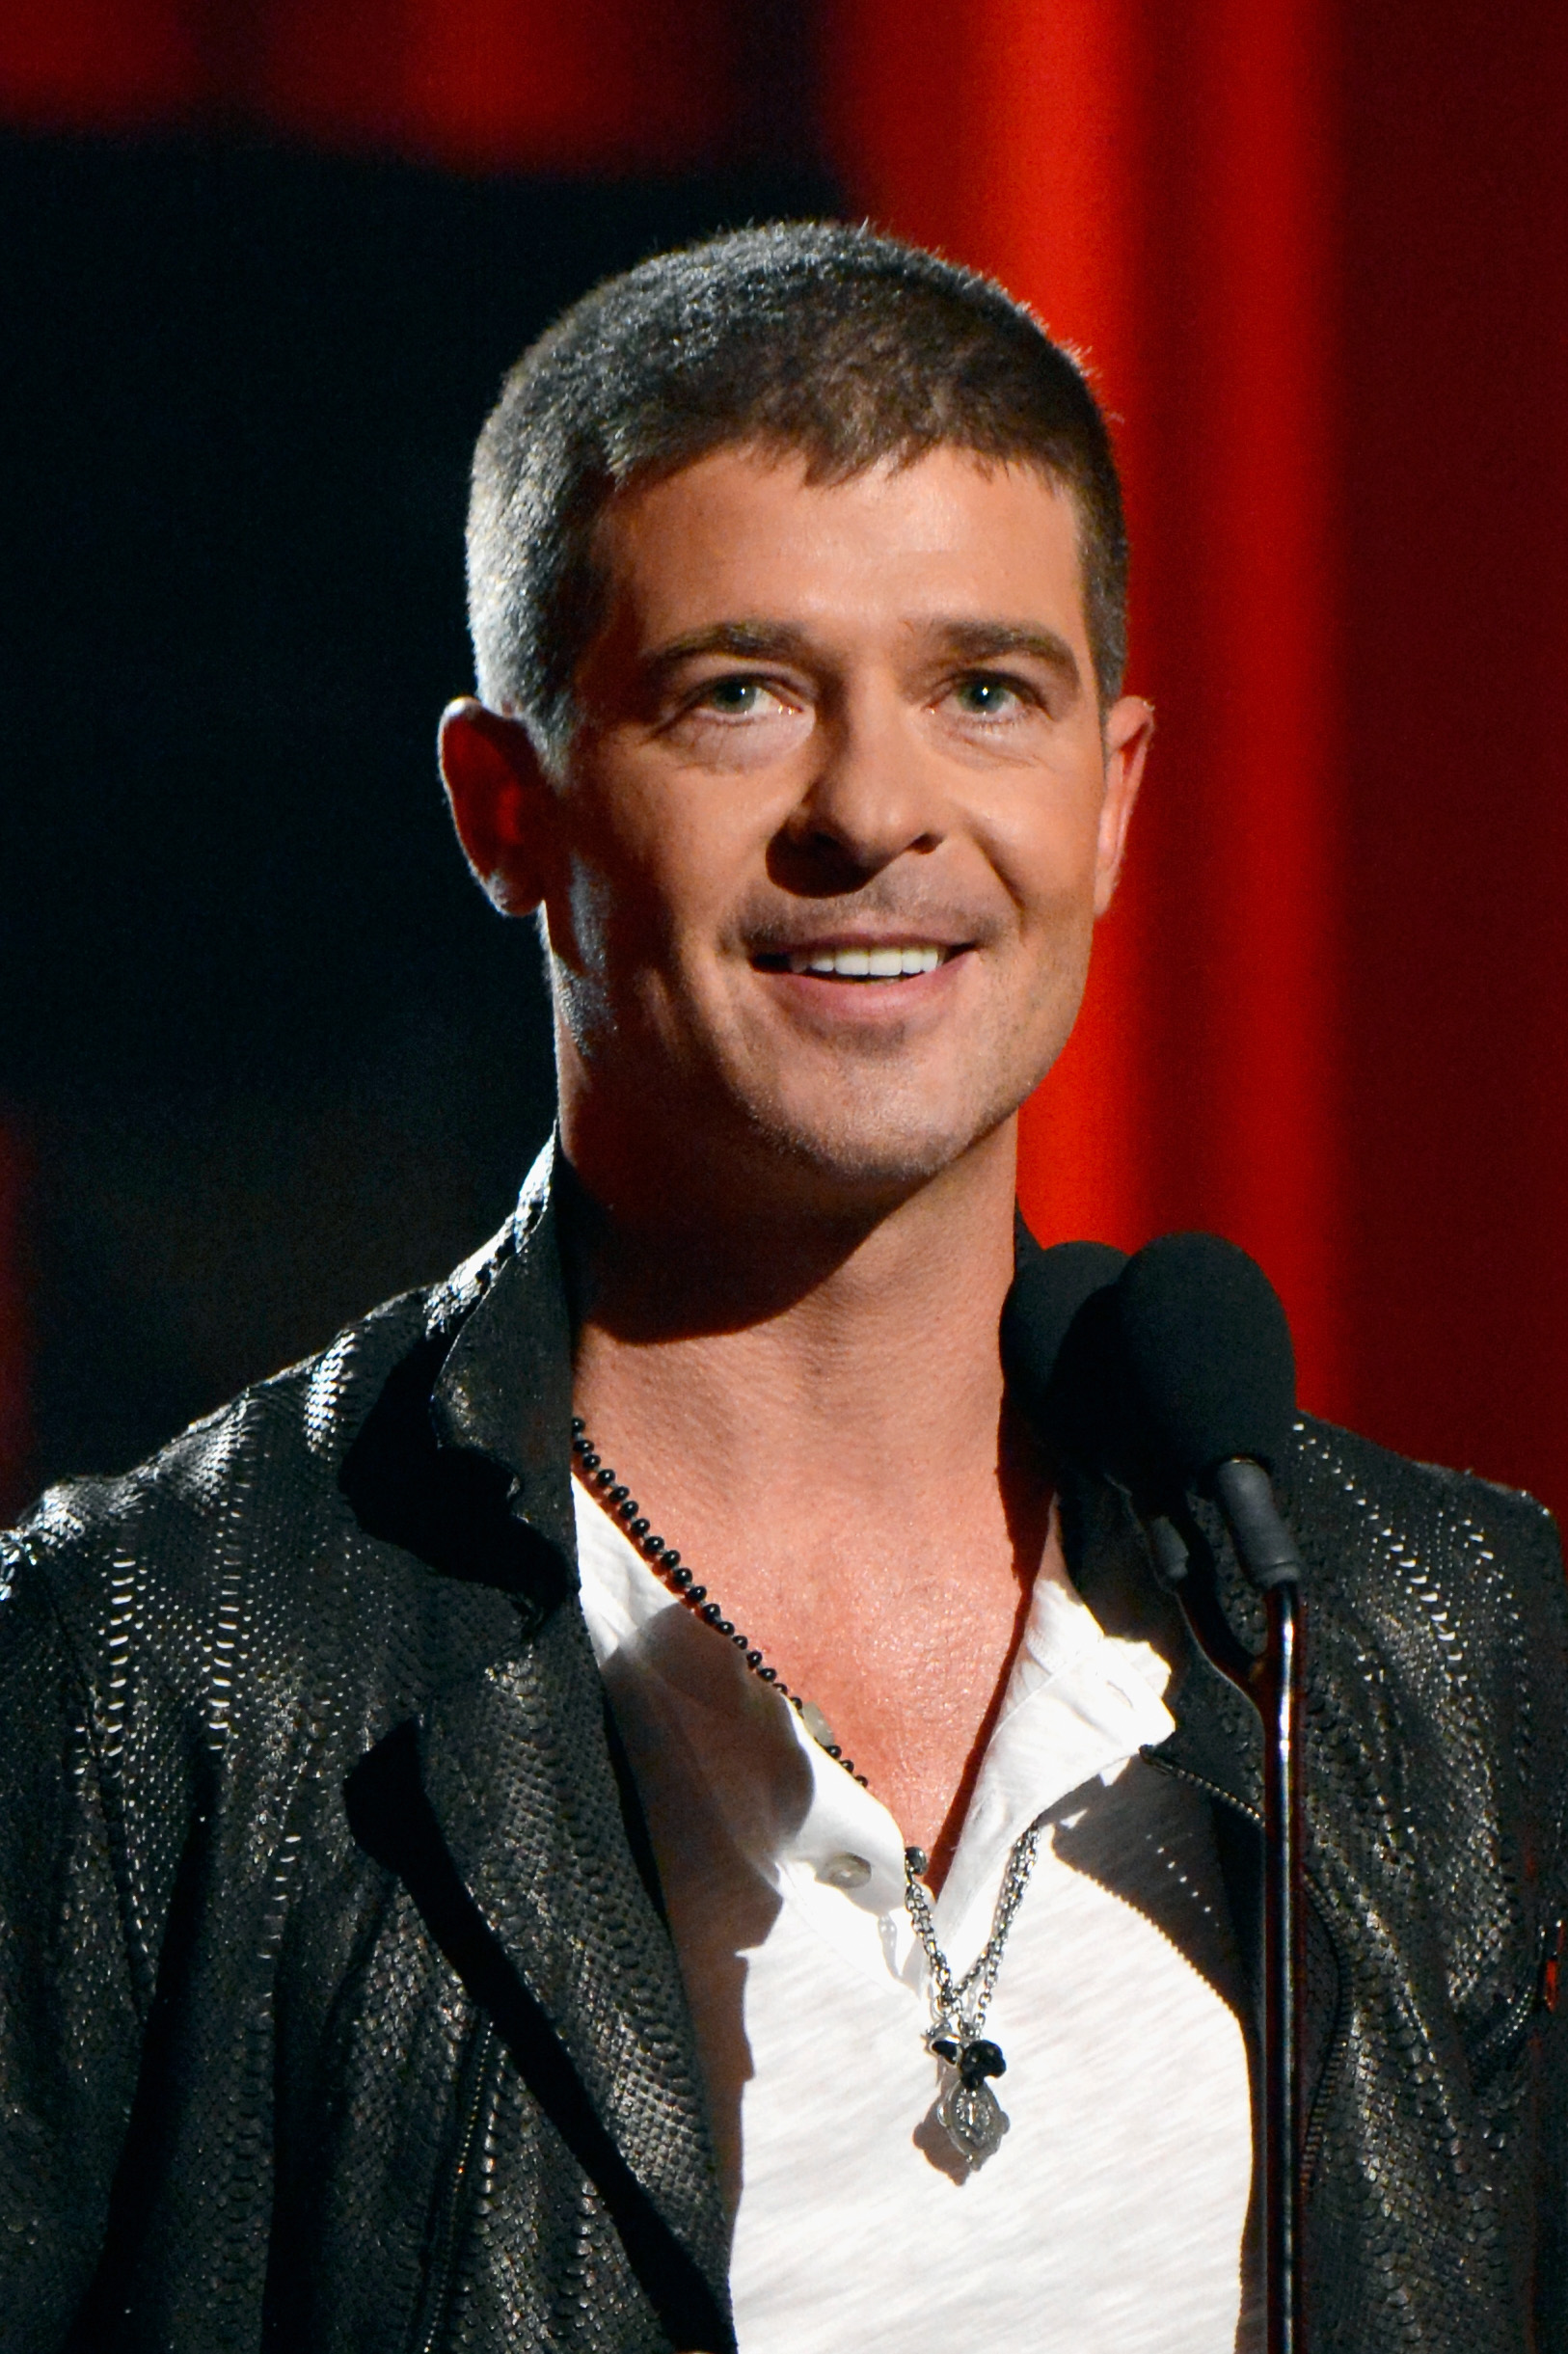 Singer Robin Thicke performs onstage during the 2014 Billboard Music Awards at the MGM Grand Garden Arena on May 18, 2014 in Las Vegas.